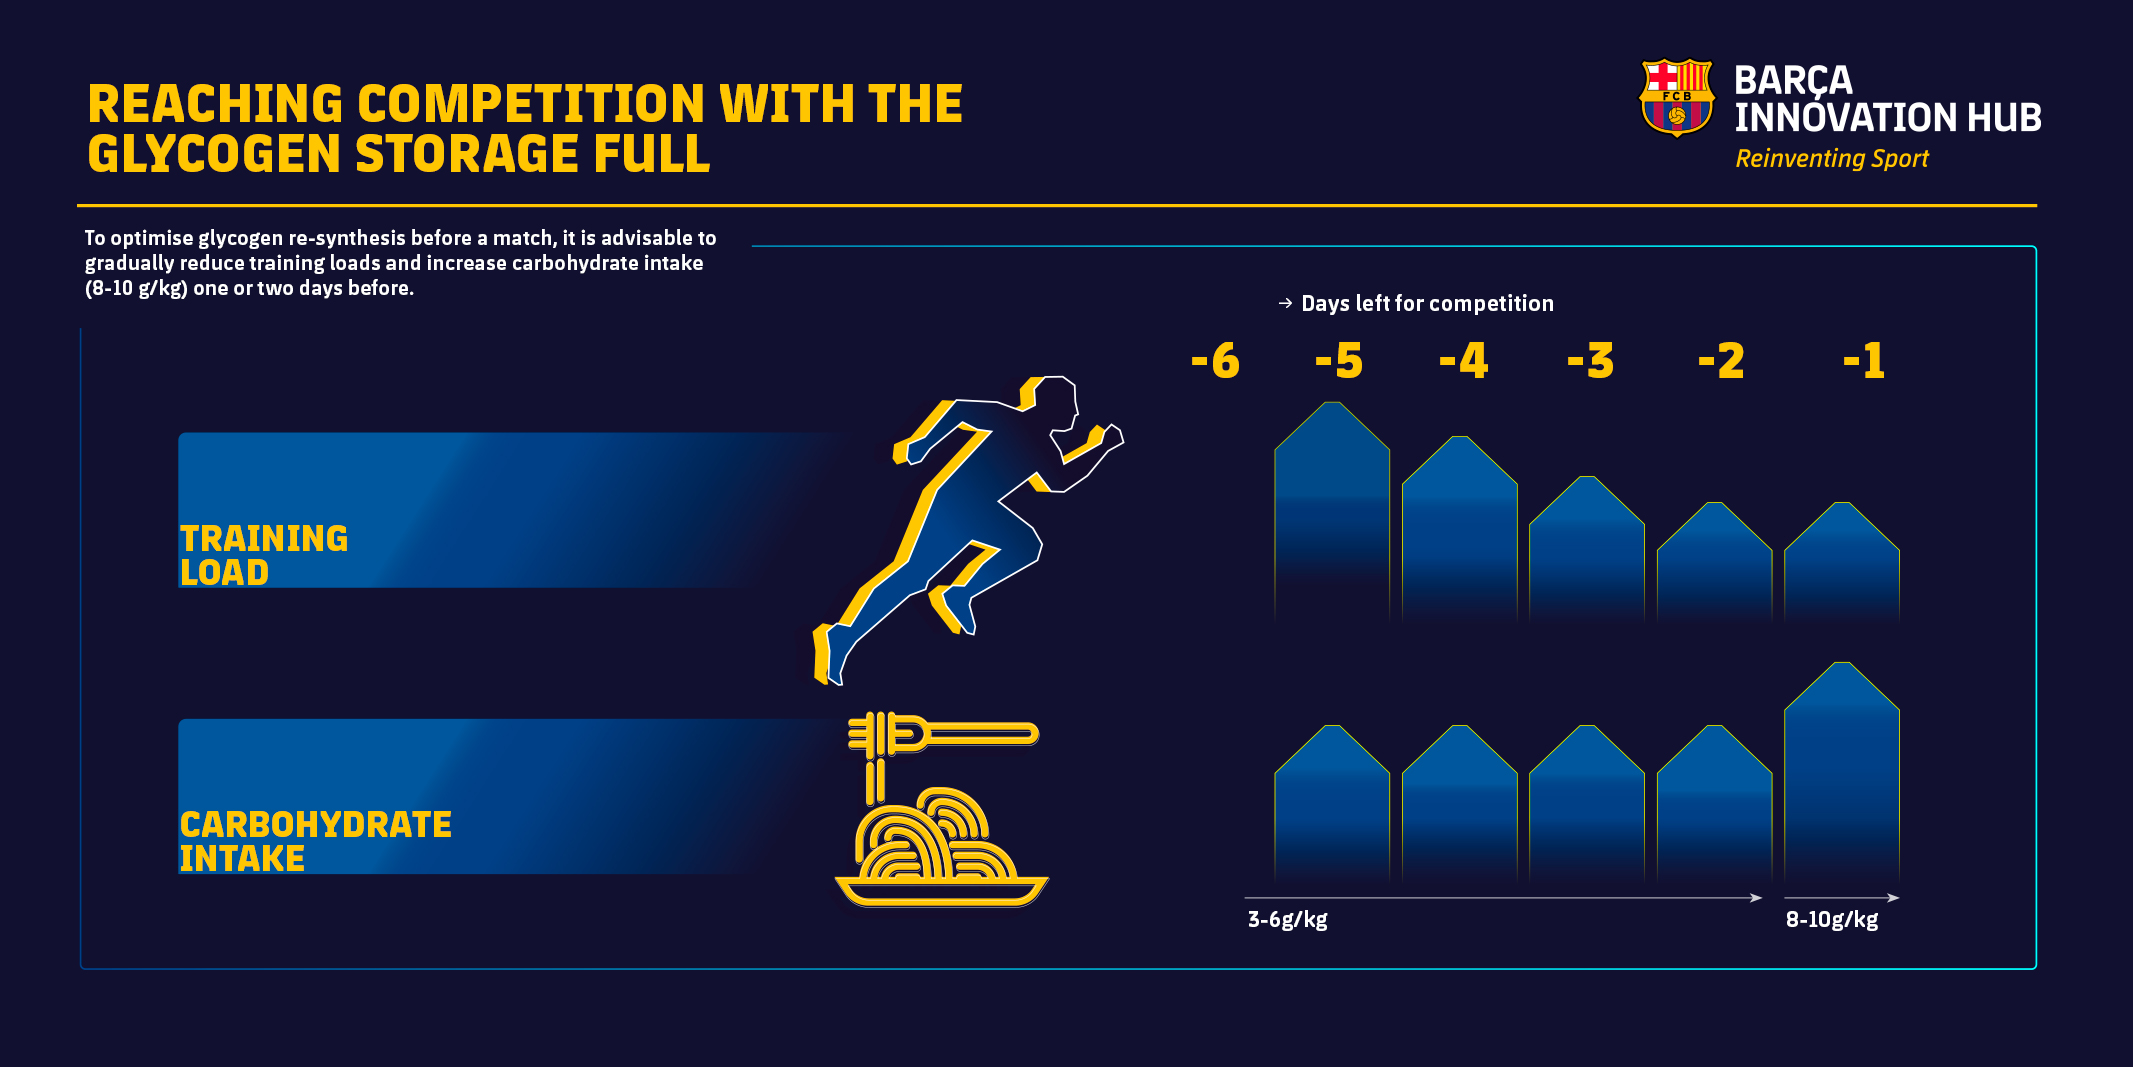 Figure 3 Summary for players to reach competition with full glycogen stores.